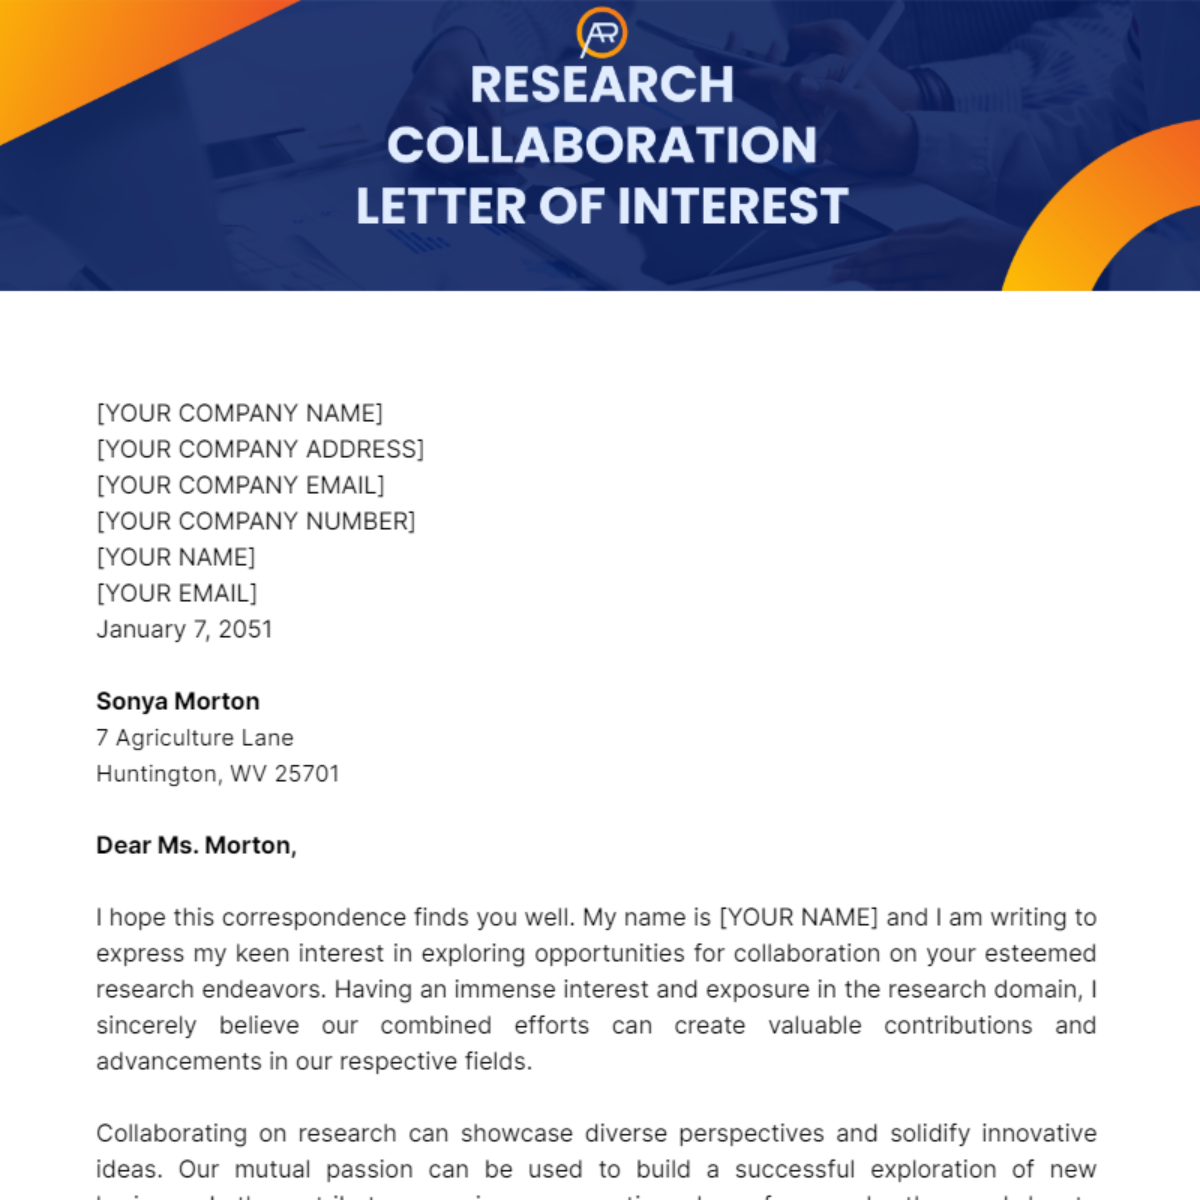 Research Collaboration Letter of Interest Template